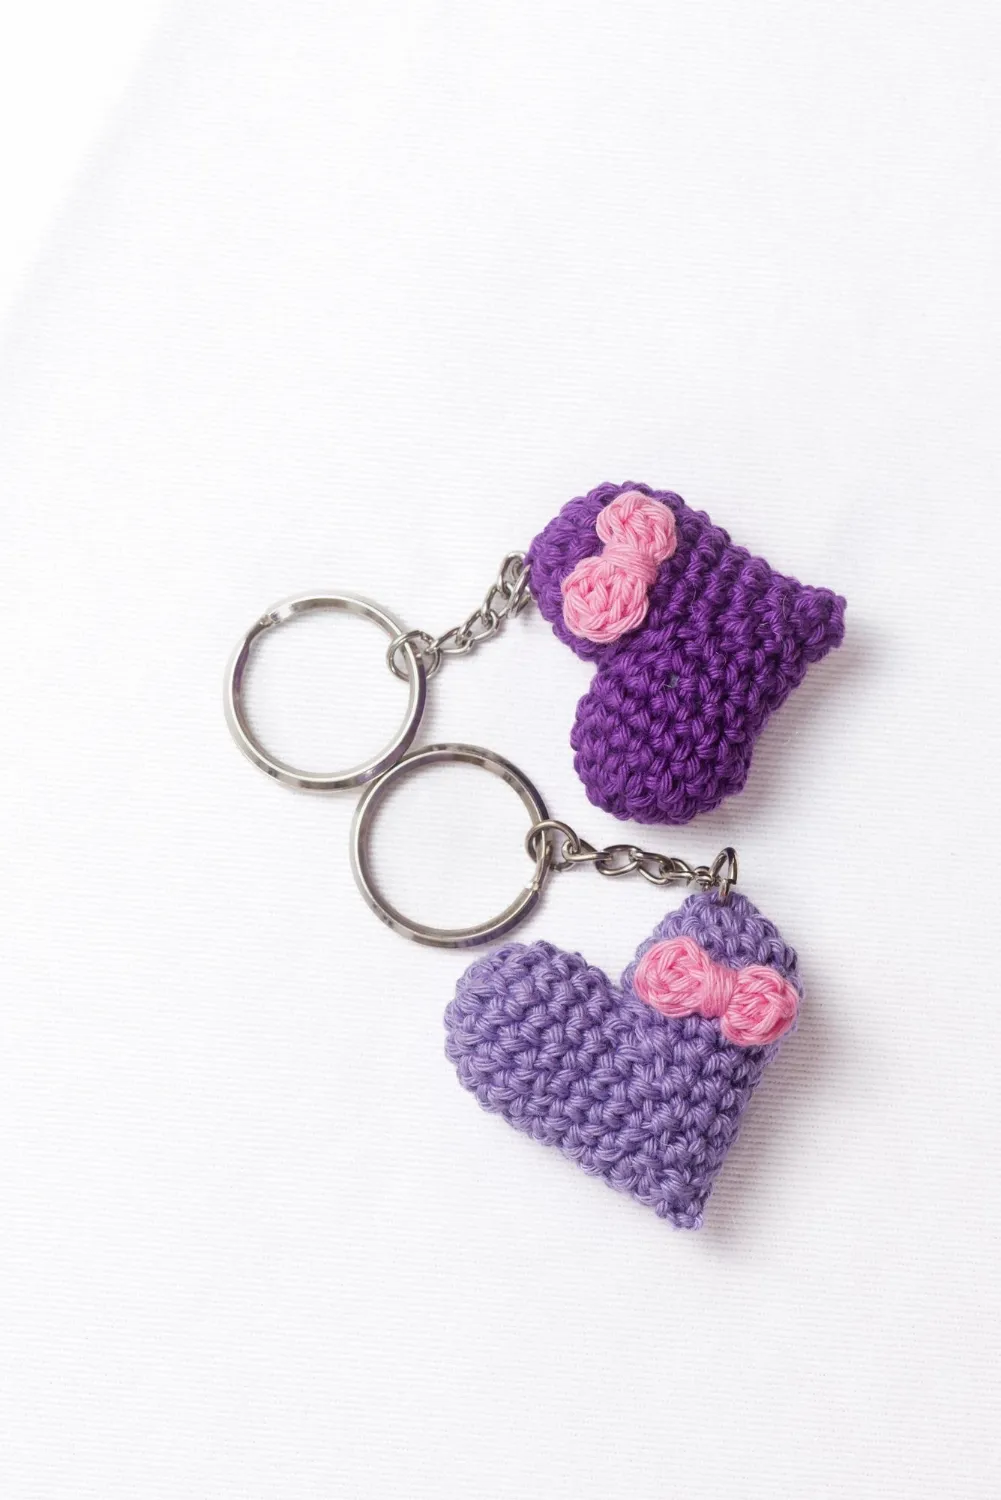 Crocheted purple heartshaped keyrings on a white background